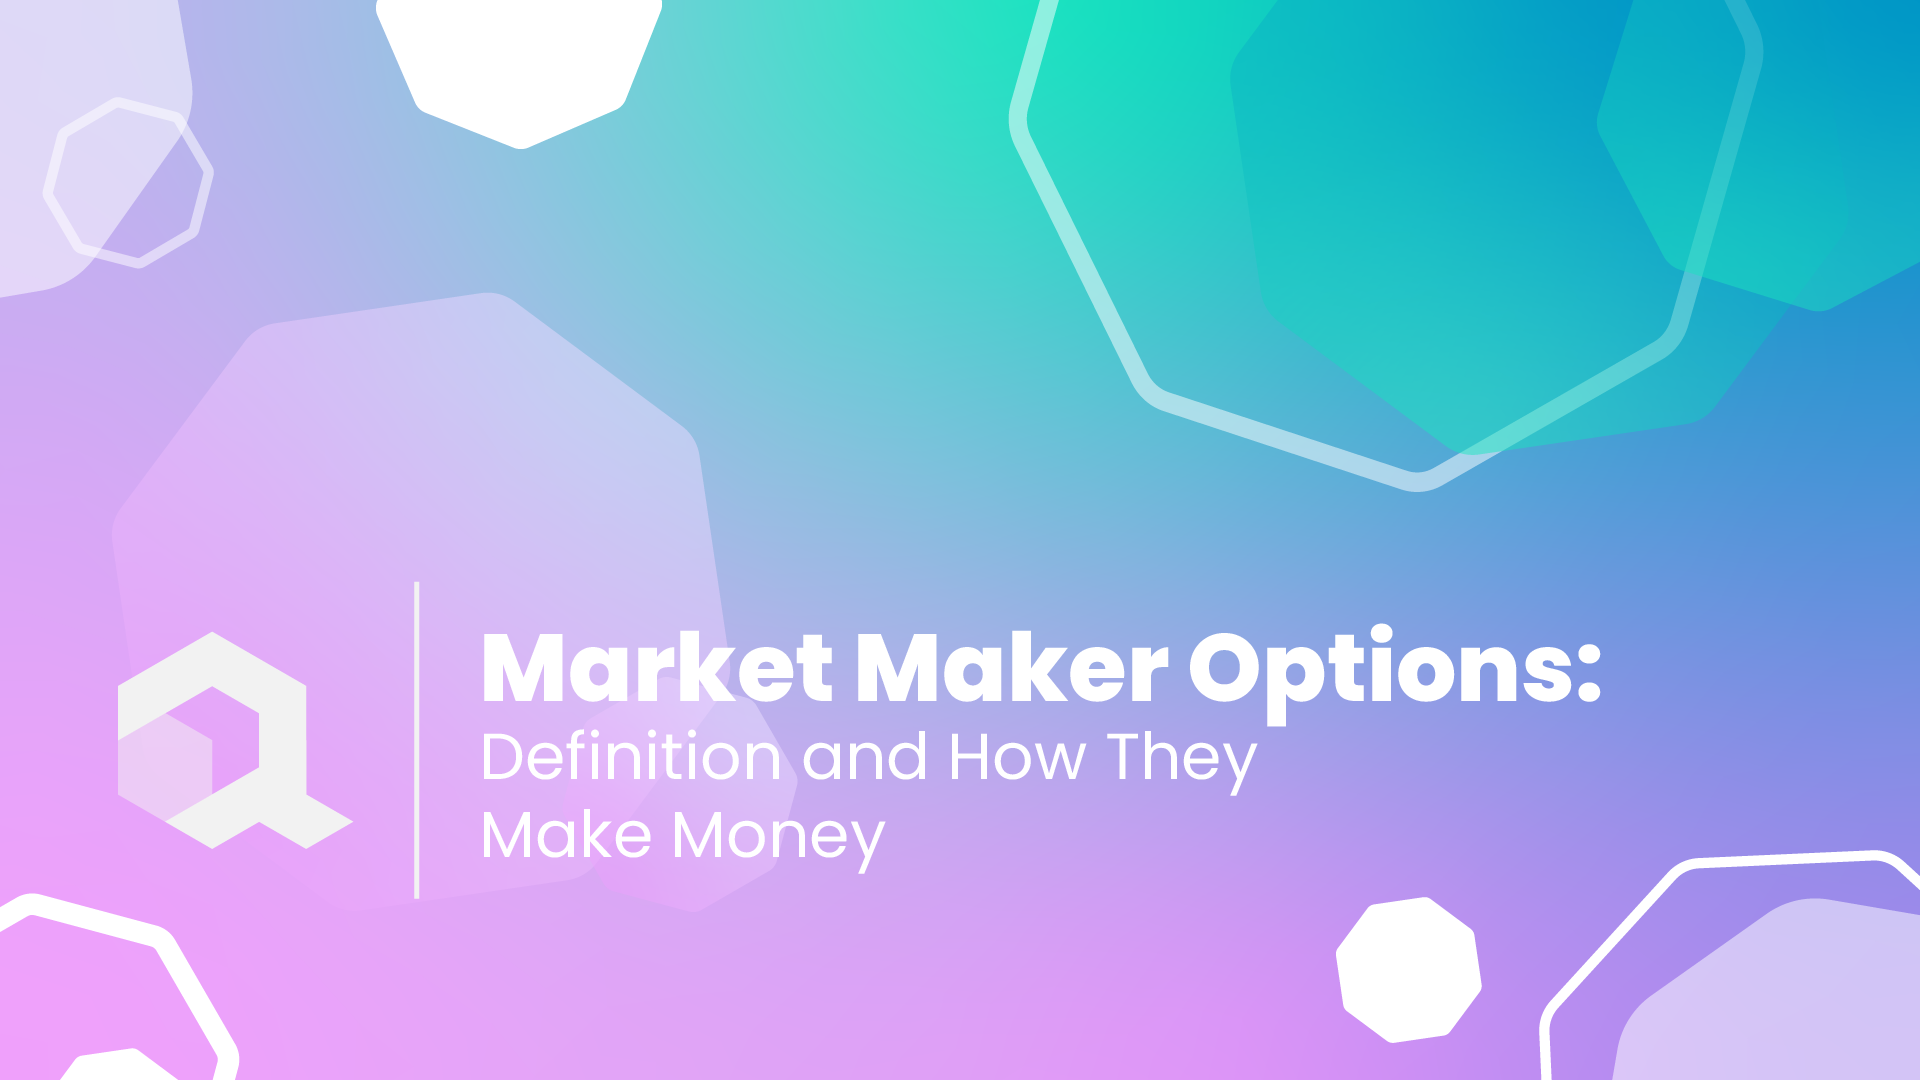 Market Maker Options: Definition and How They Make Money